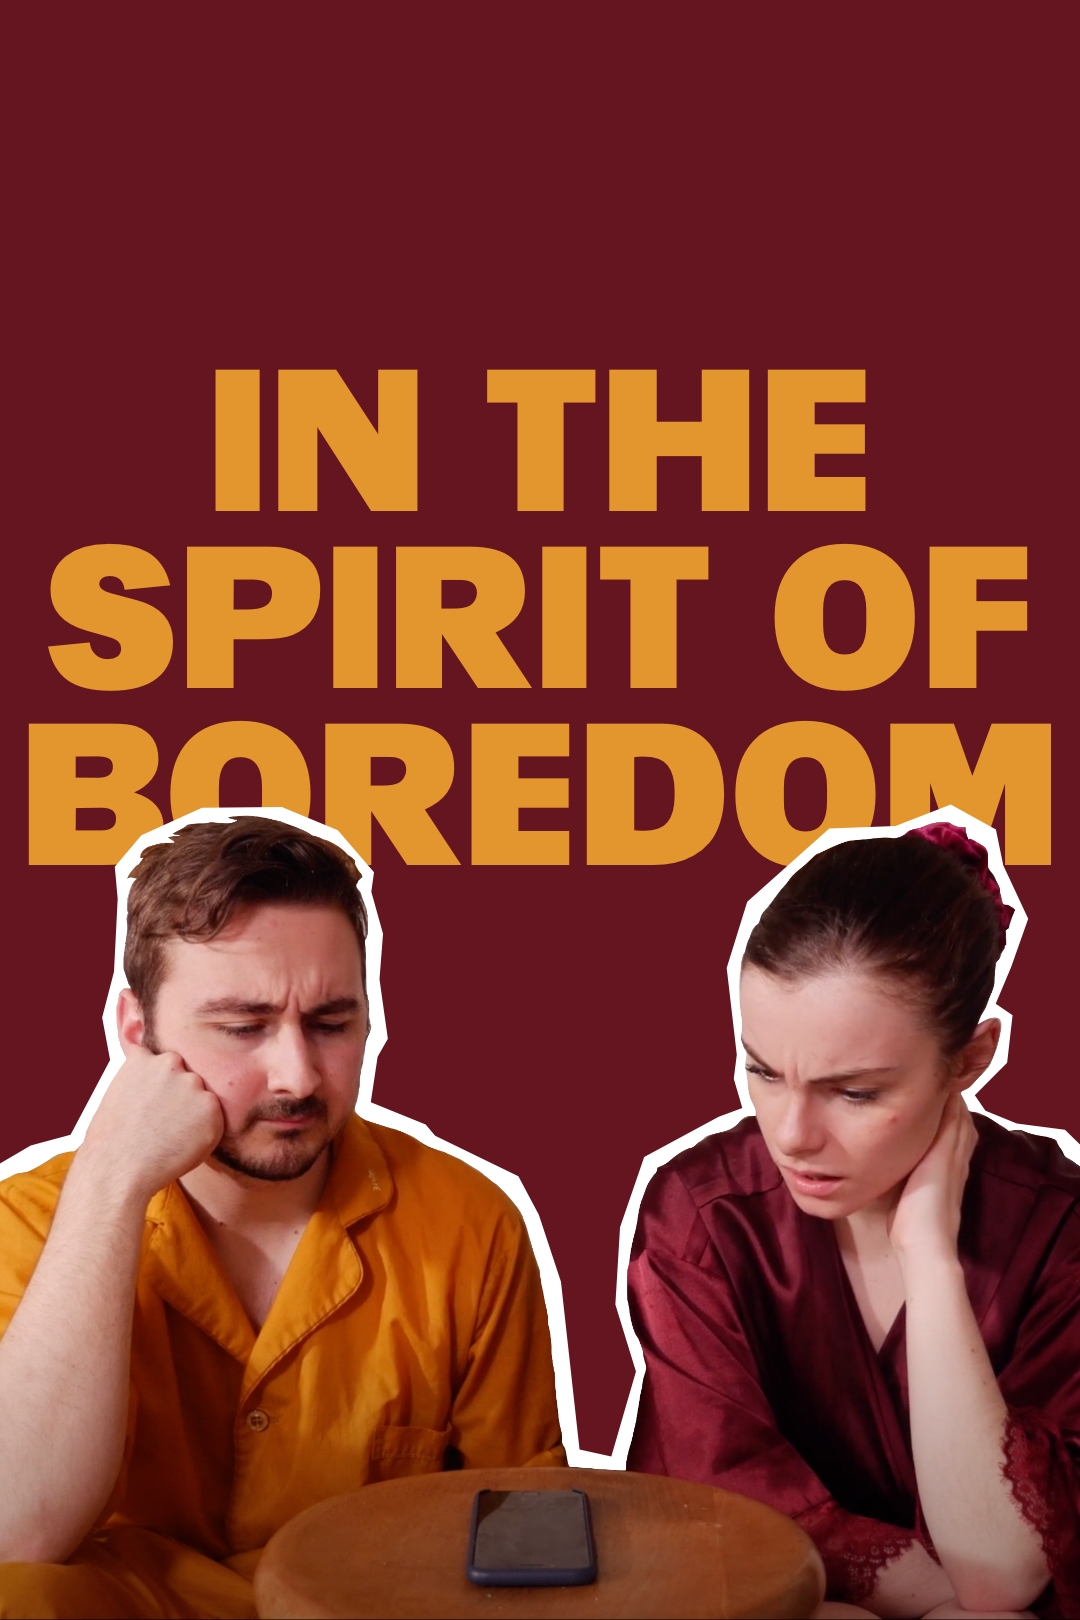 Poster for the film "In the Spirit of Boredom"